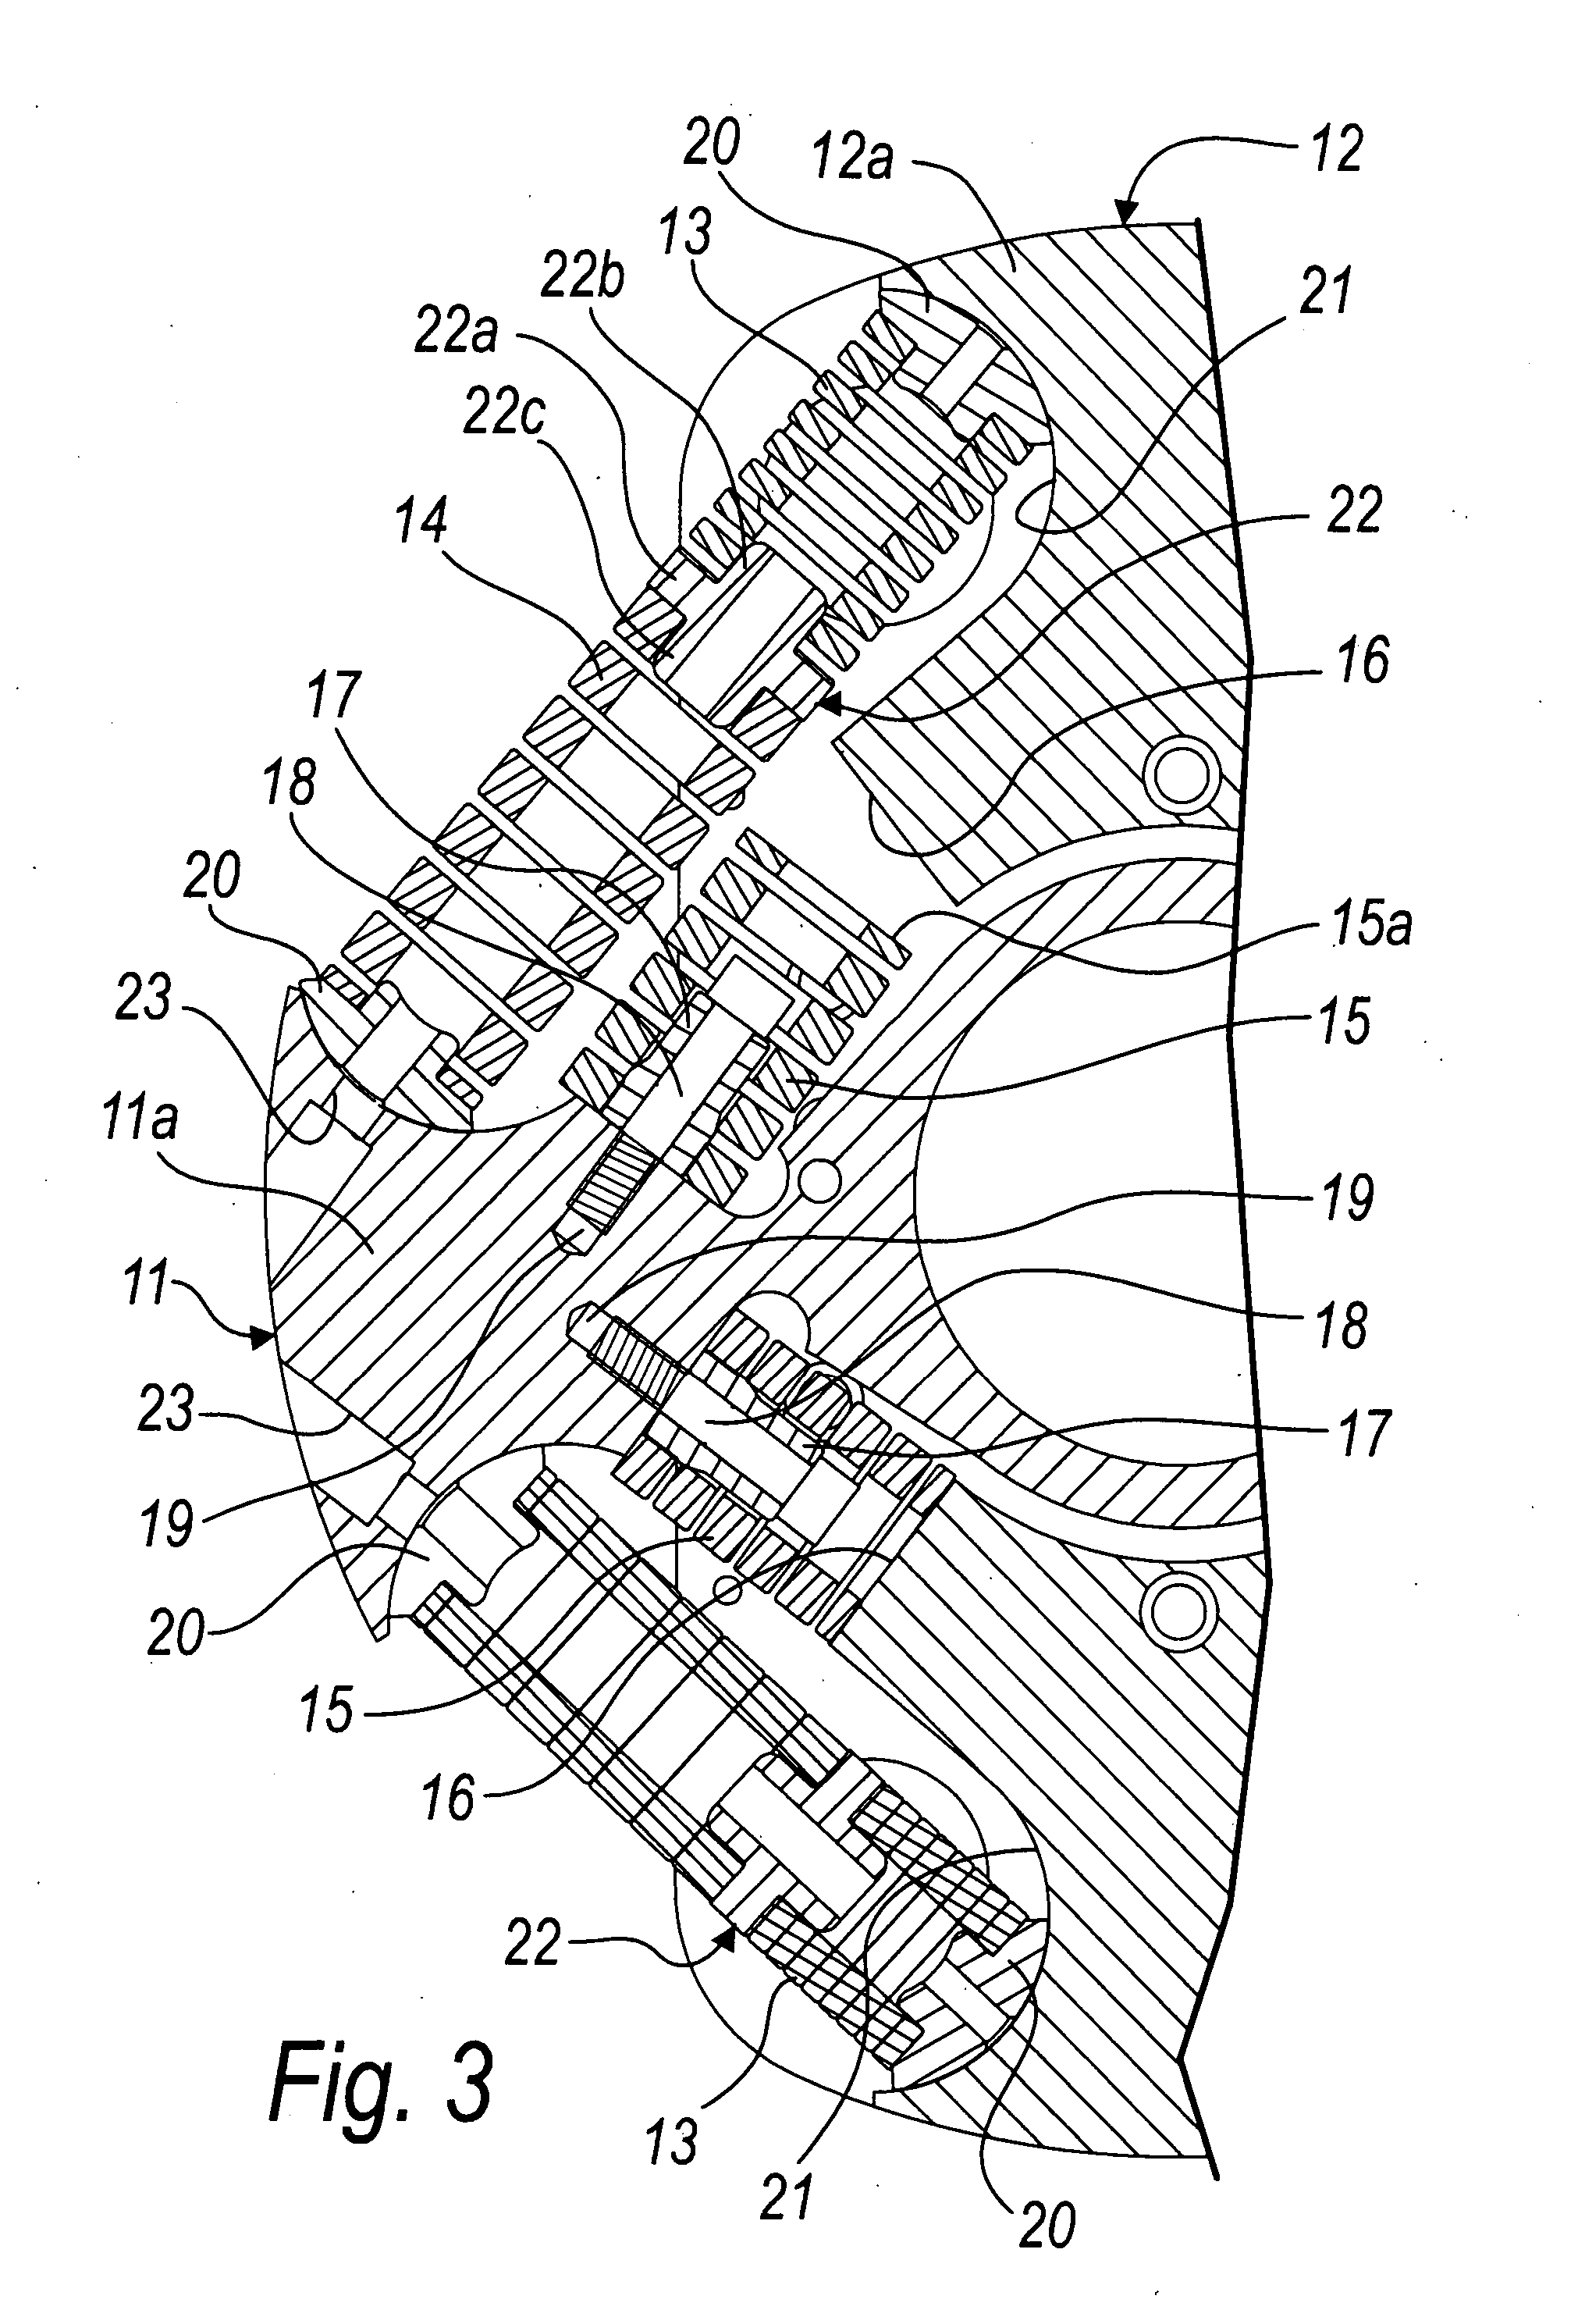 Device for combined rotation of a shaft about its own axis